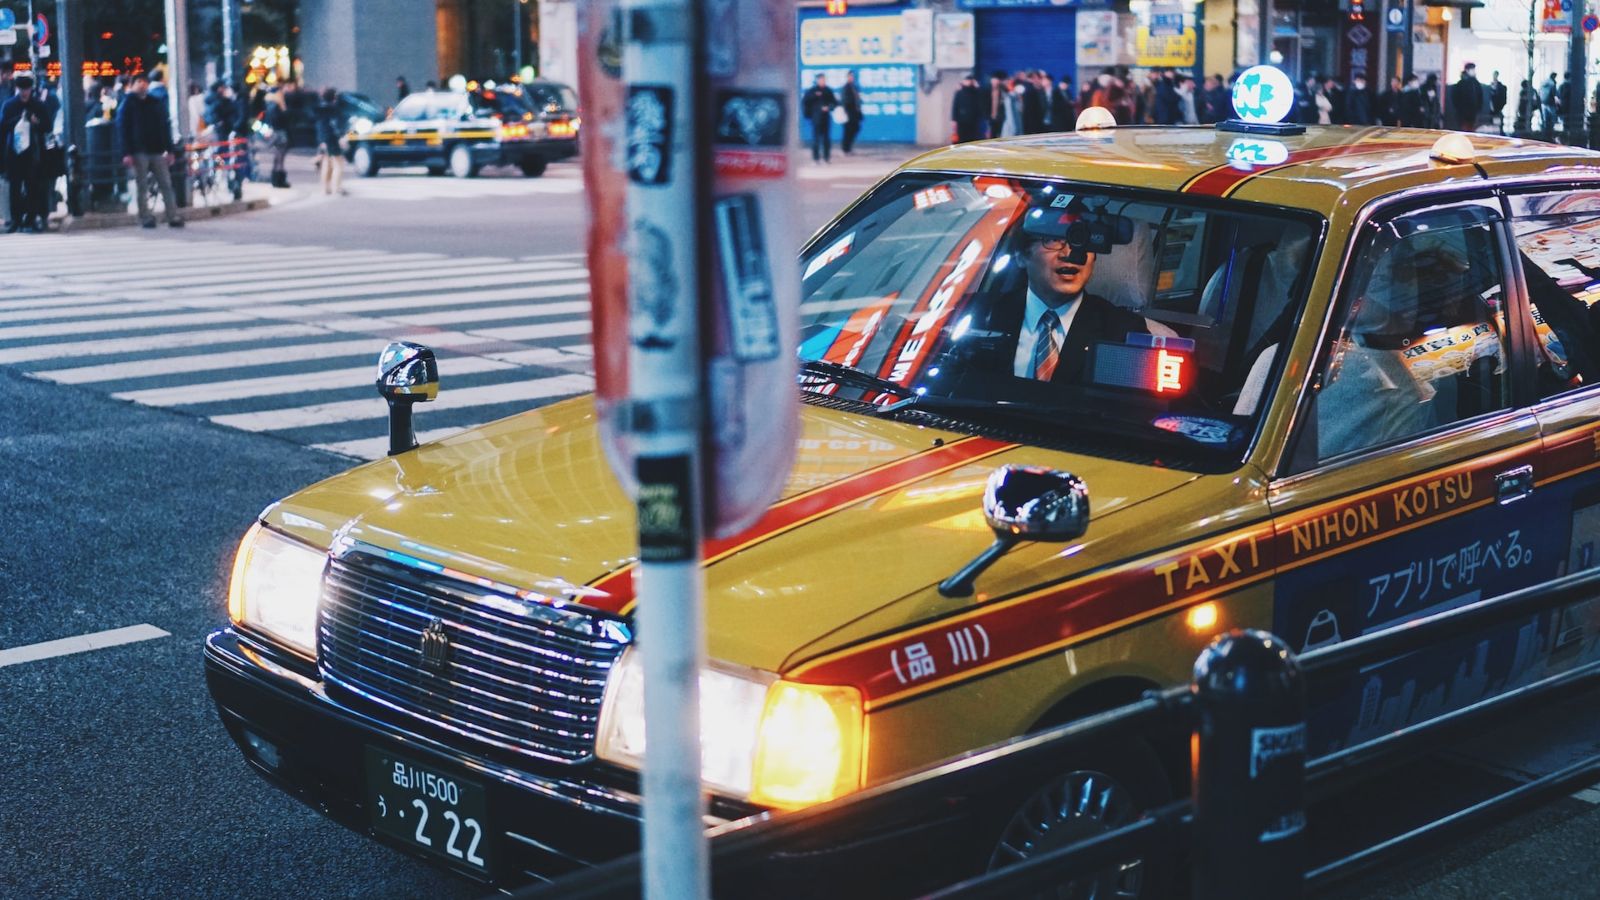 Taxi in Tokyo, Japan - Point Hacks